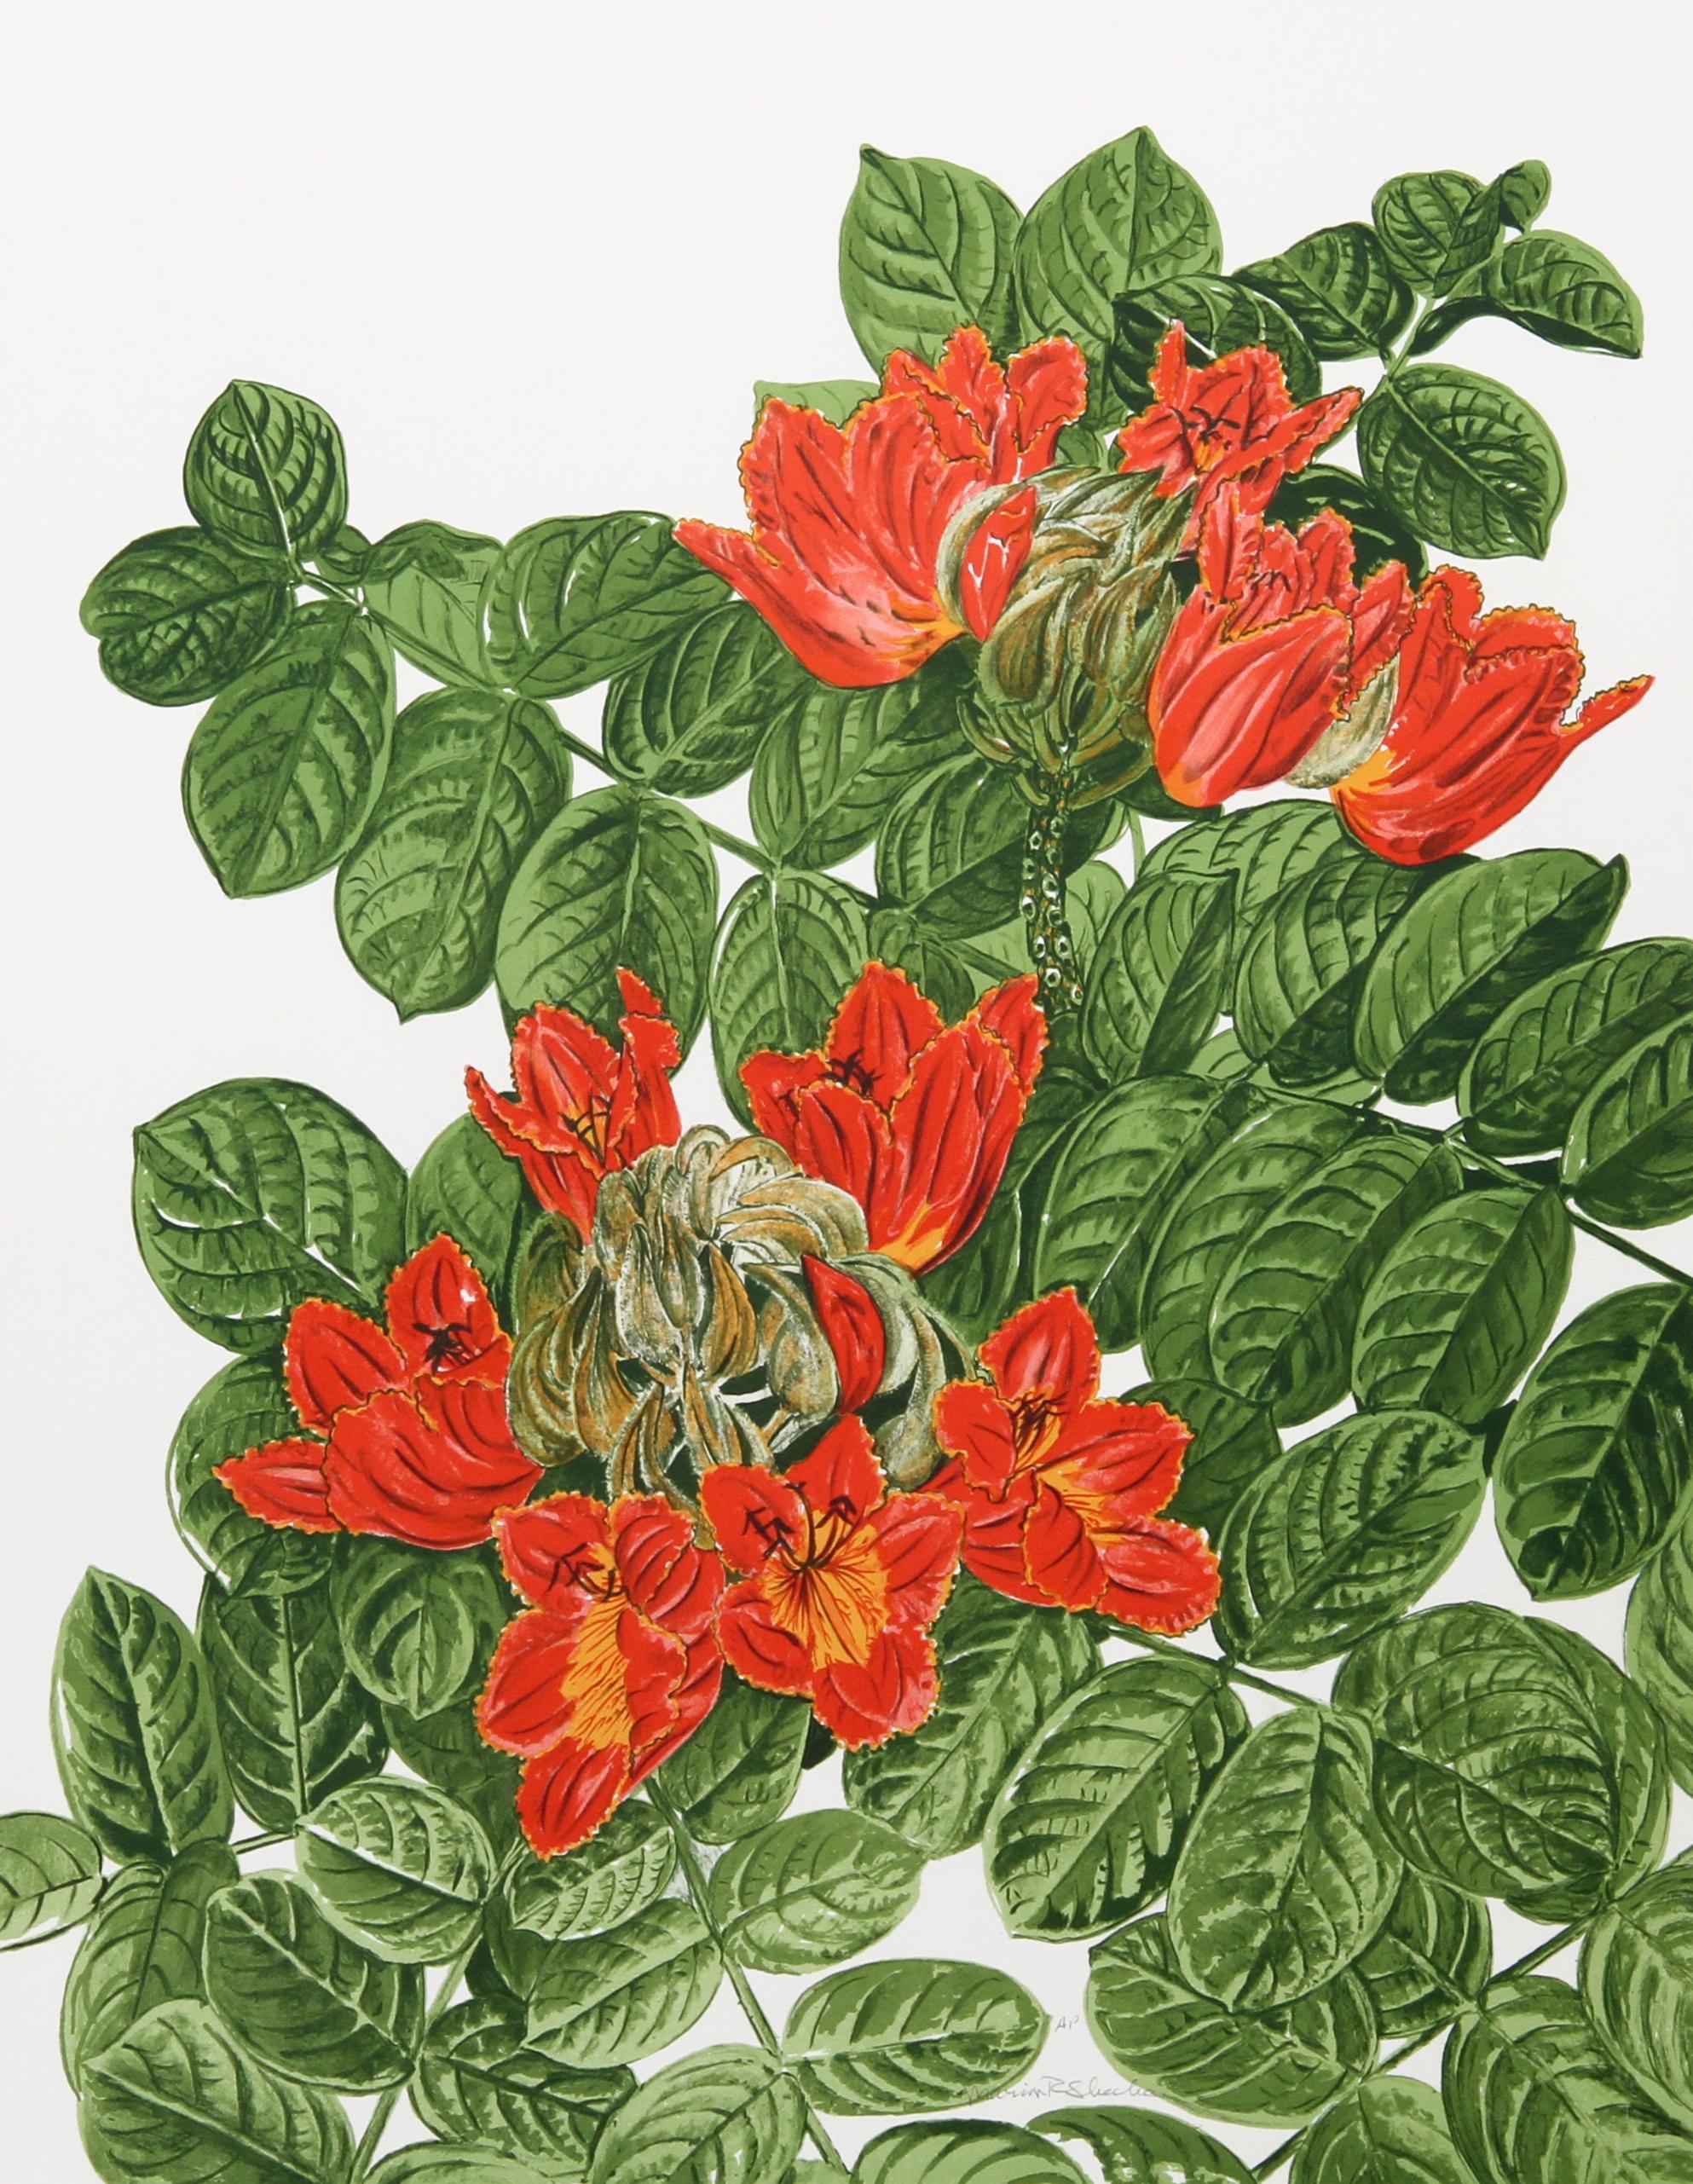 African Tulip Tree
Marion Sheehan. American
Date: 1979
Lithograph, signed and numbered in pencil
Edition of 250, AP
Size: 27 in. x 21 in. (68.58 cm x 53.34 cm)